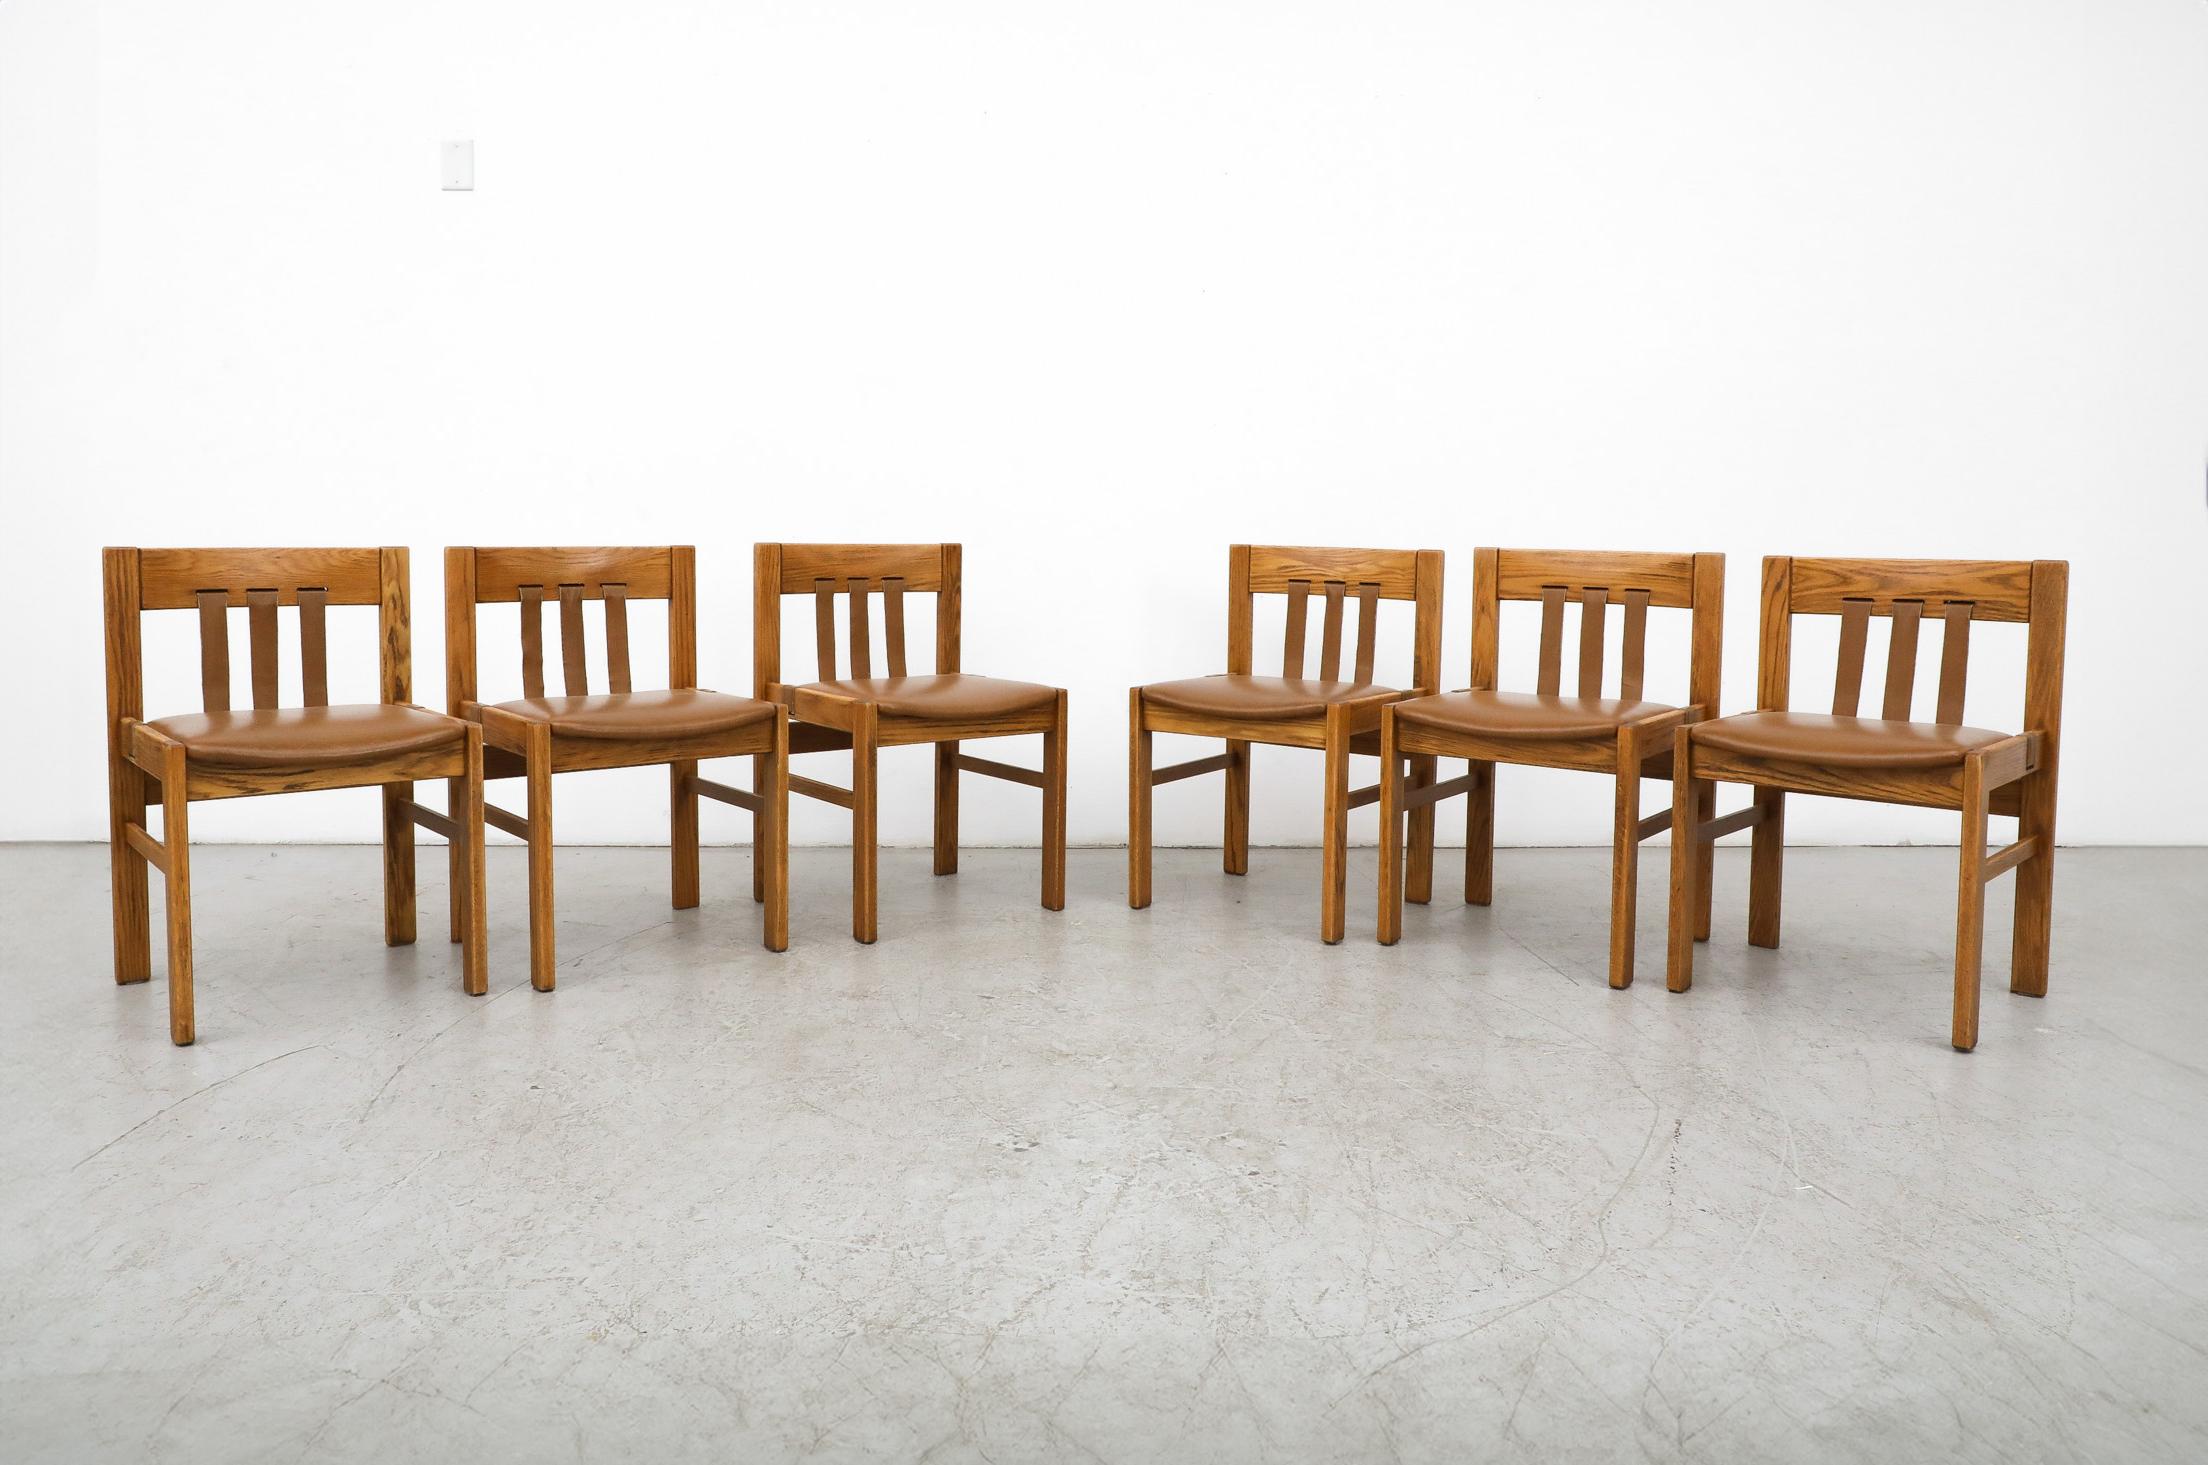 Beautiful set of 6 Mid-Century dining chairs by Martin Visser for 't Spectrum.  Highly appealing Modernist design and handsomely streamlined oak frame outfitted with leather strapping make this set truly eye-catching as well as a great example of